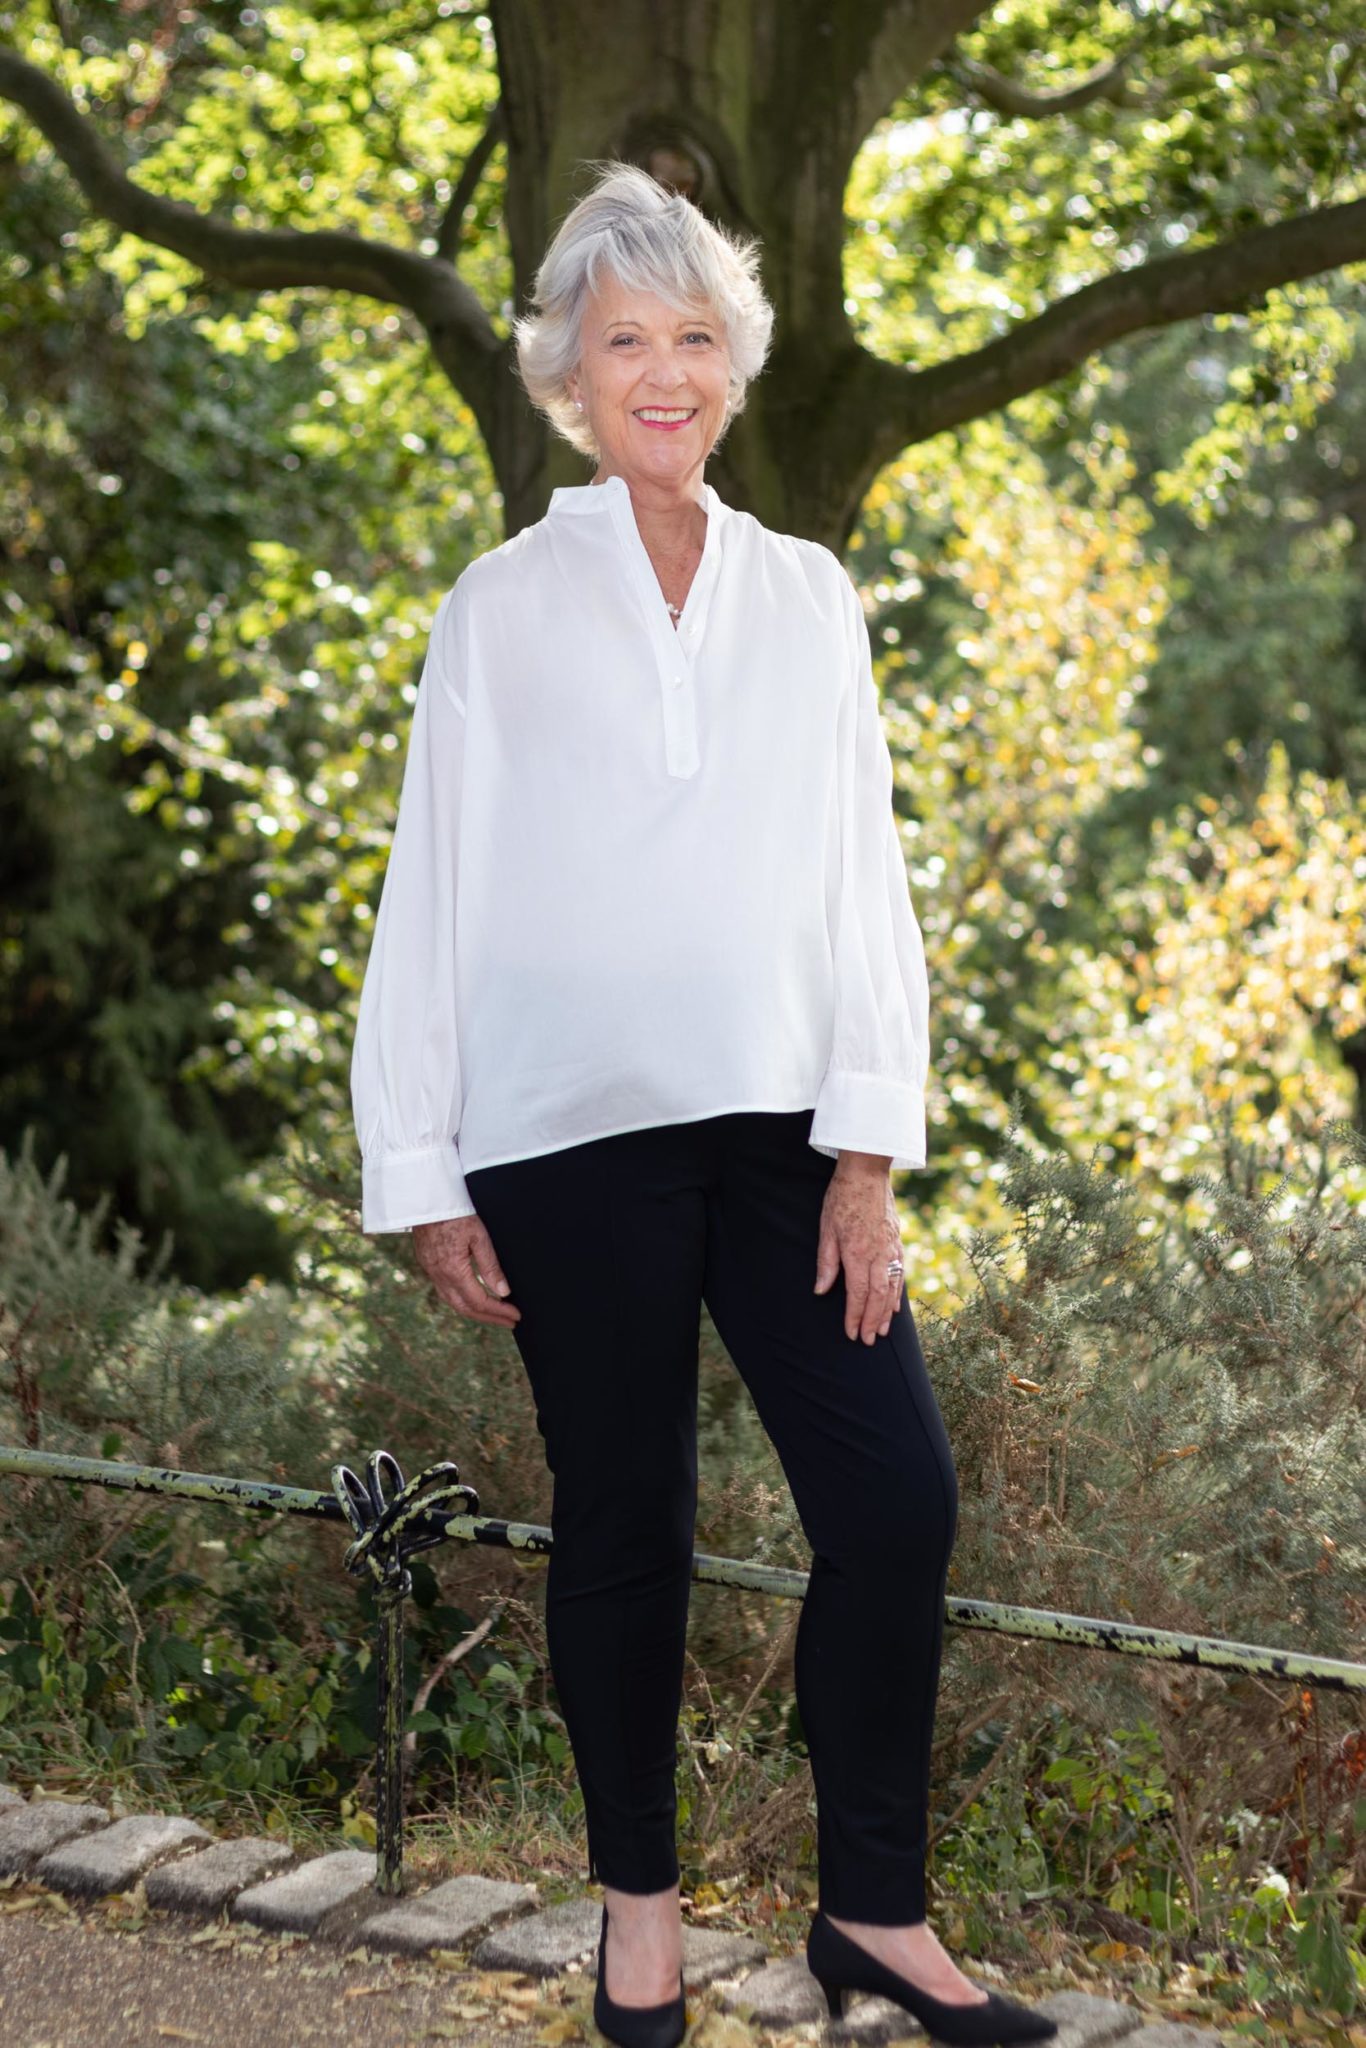 Clean and simple dressing - Chic at any age